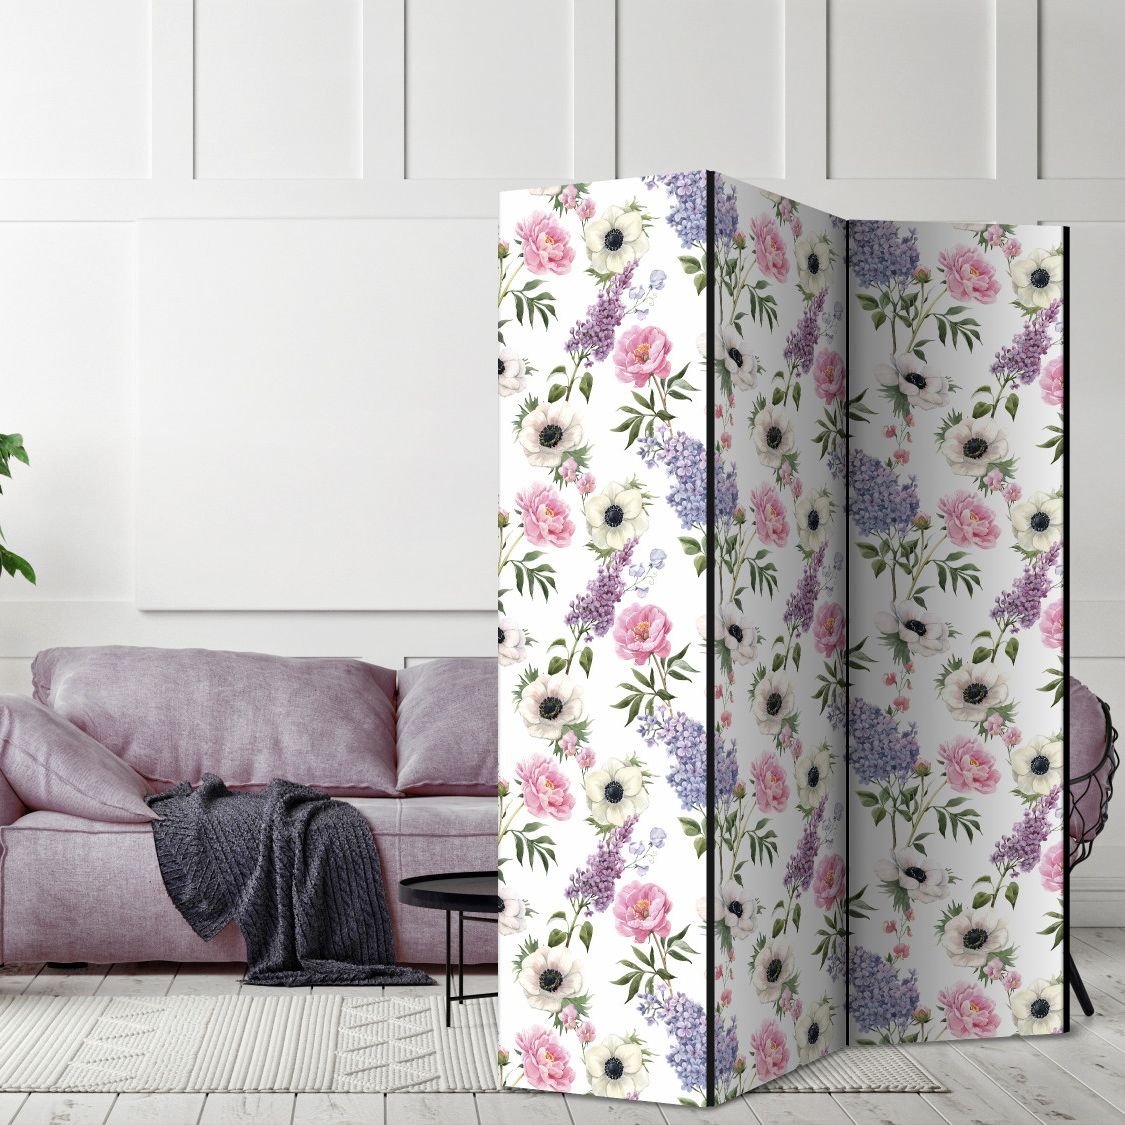 a beautiful modern living room with 3 panels floral patterned room divider screen covering half of a sofa that is purple and look stunning with the shades of purple and pink that this folding canvas screen has